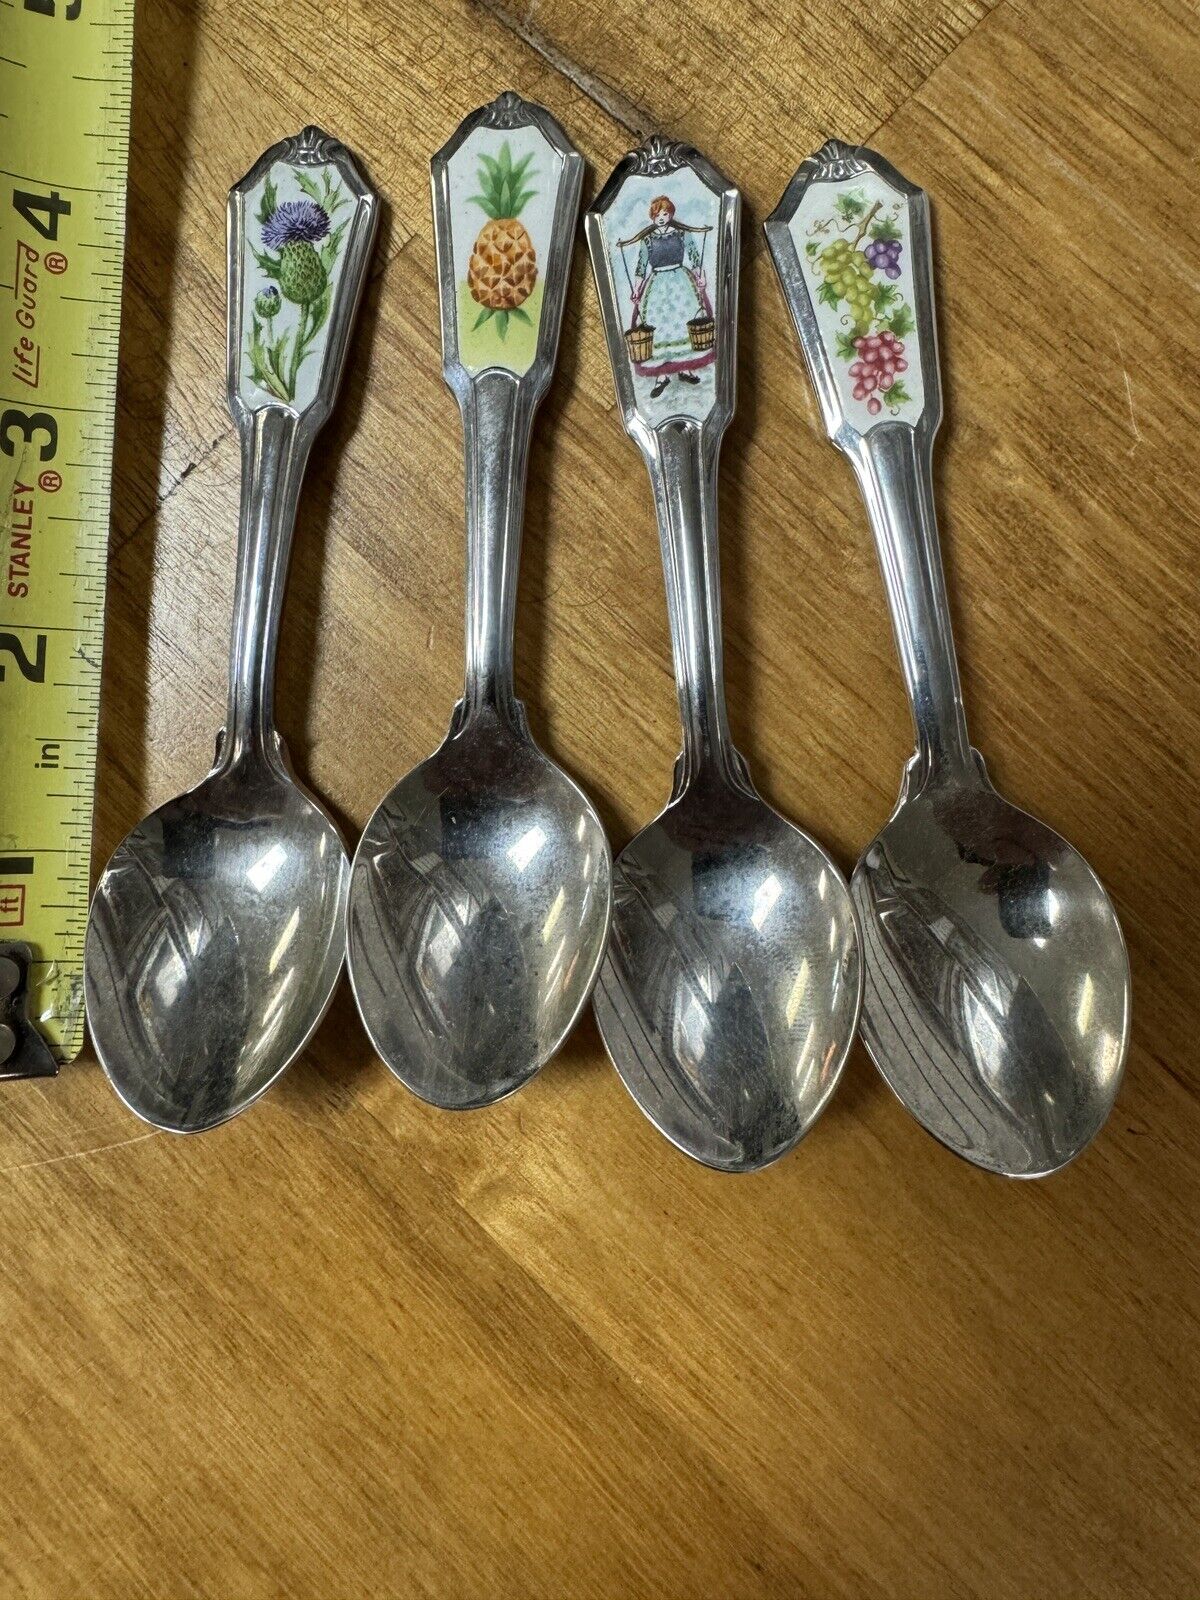 1985 Different Countries Spoons 4 Lot